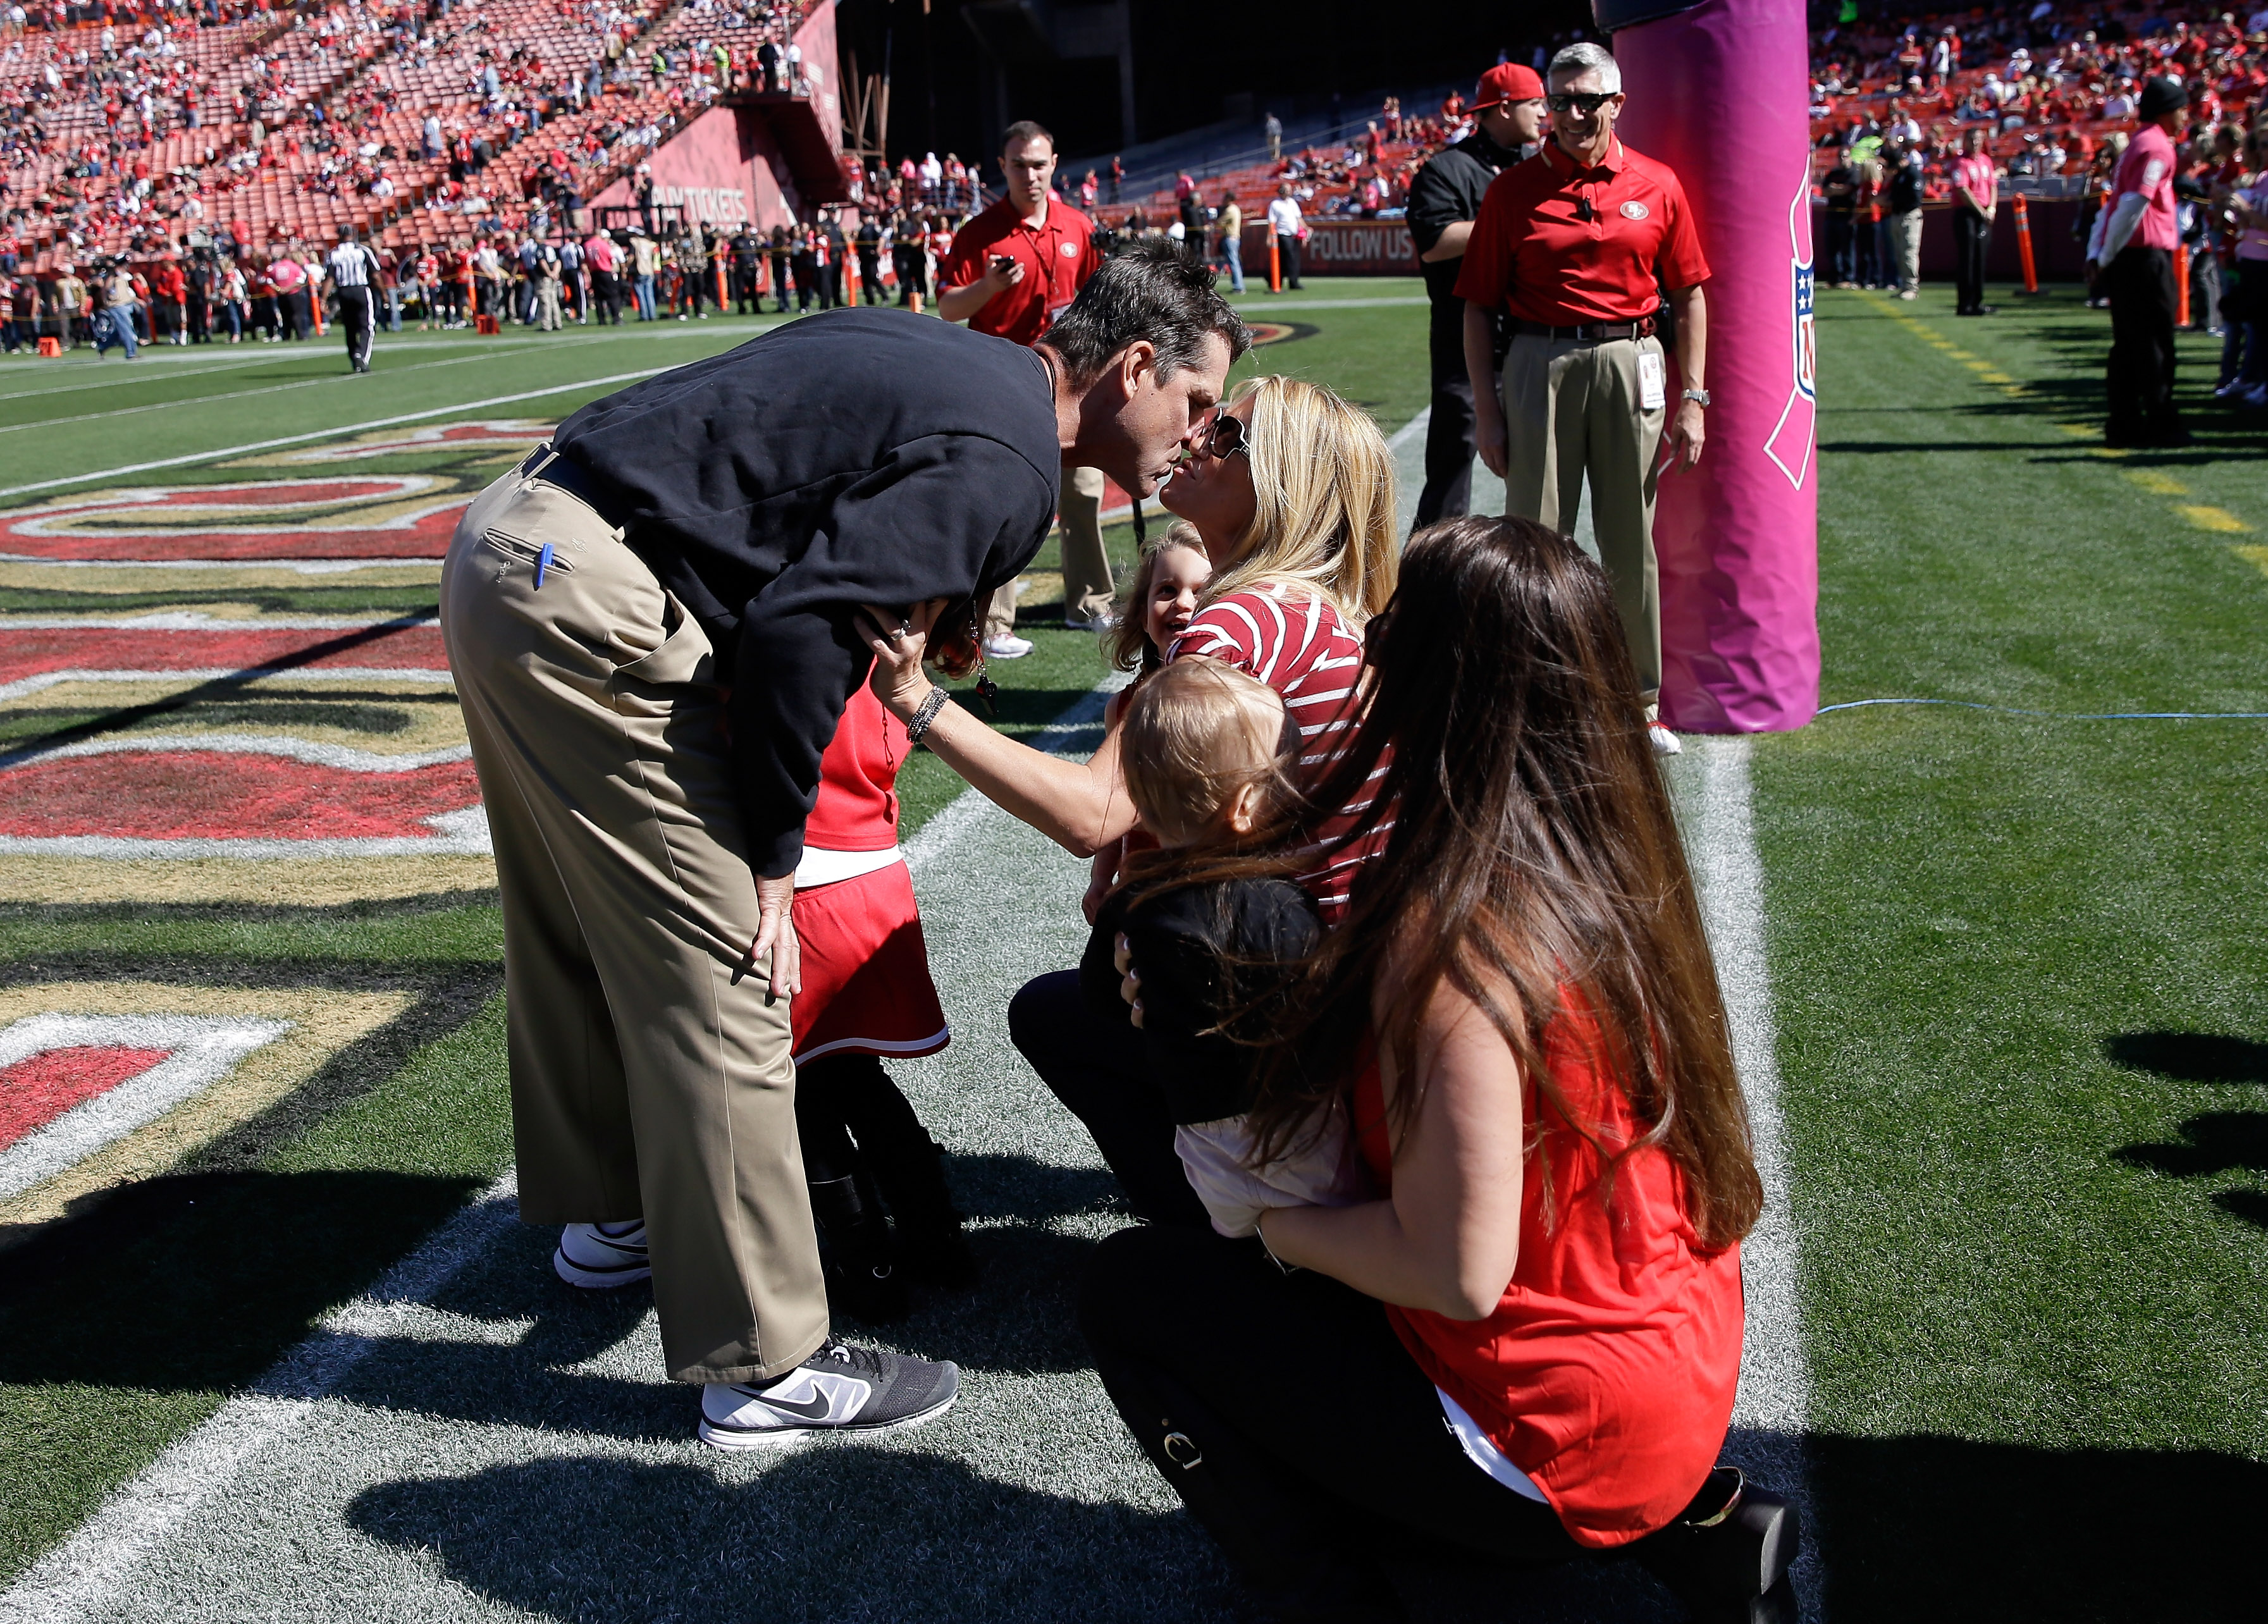 Jim Harbaugh kisses his wife Sarah Feuerborn Harbaugh before a game at Candlestick Park on October 13, 2013, in San Francisco, California | Source: Getty Images